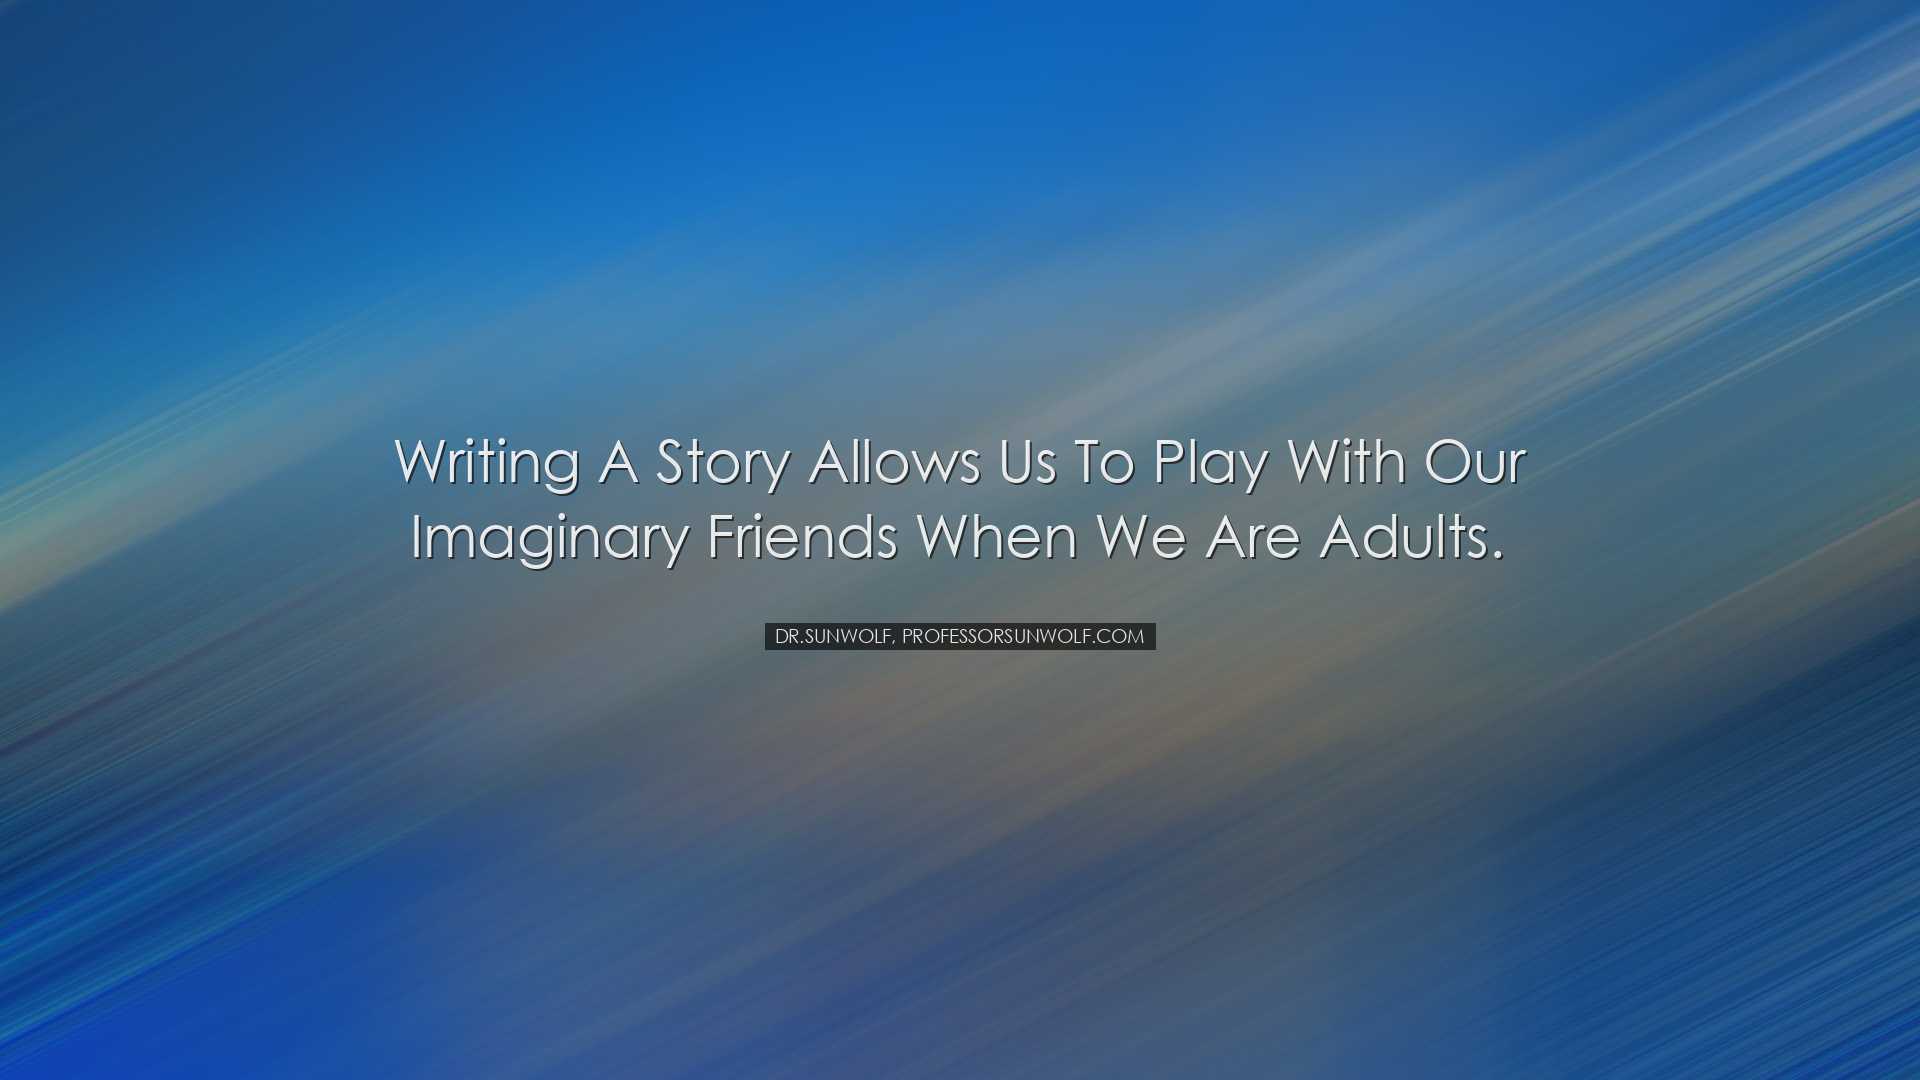 Writing a story allows us to play with our imaginary friends when